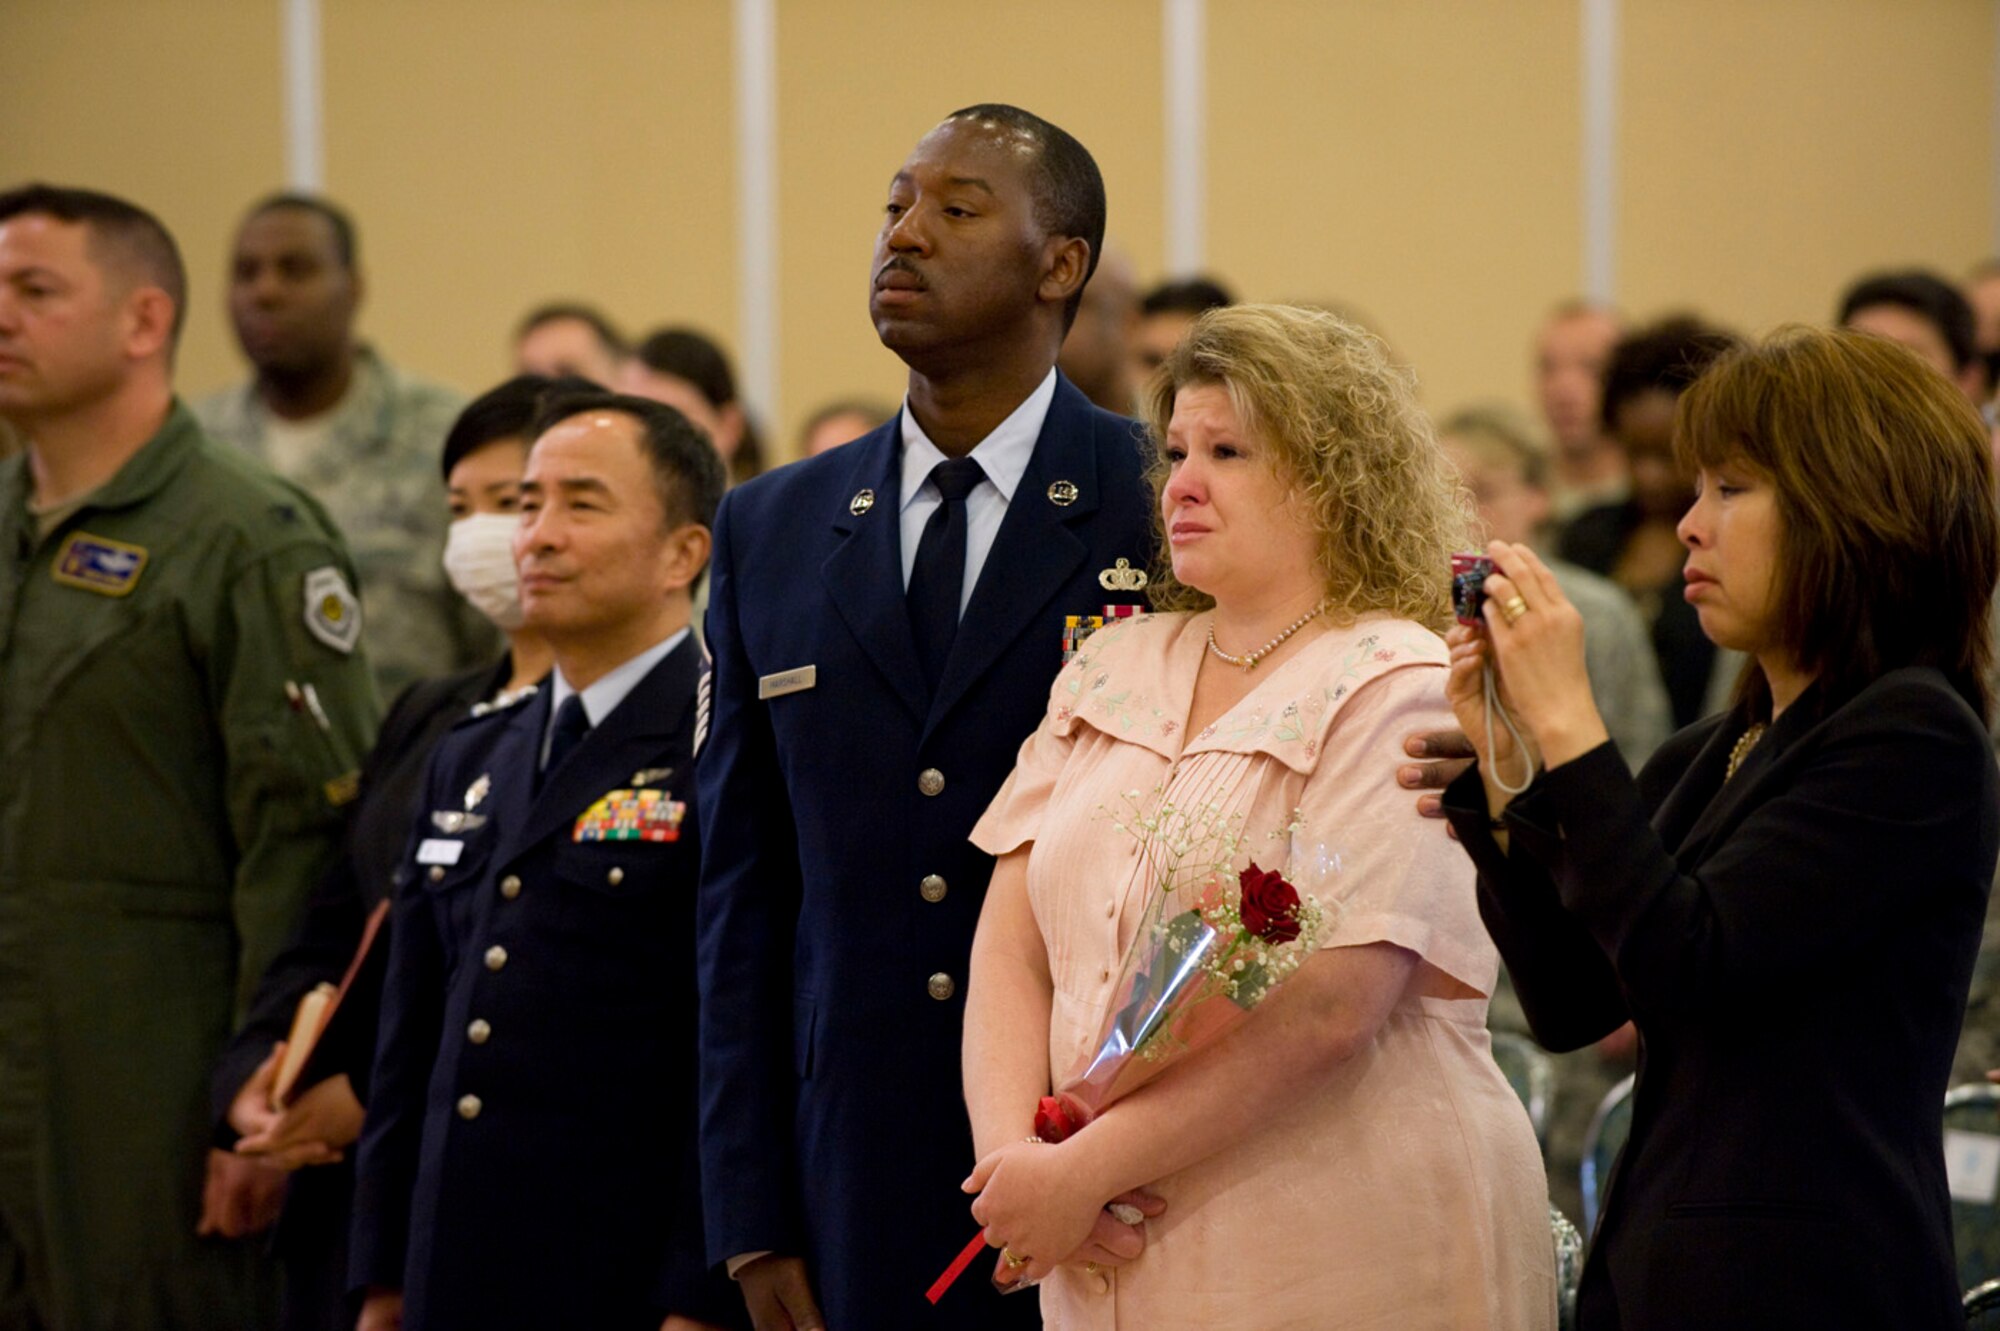 MISAWA AIR BASE, Japan -- While holding a single rose, Joan Price, Chief Master Sgt. Ricky Price's wife, stands with the audience during the conclusion of her husband's retirement ceremony June 19, 2009. Mrs. Price instituted a coupon savers program, which saved an average of $1,500 a month for the Misawa Air Base community. (U.S. Air Force photo by Staff Sgt. Samuel Morse)